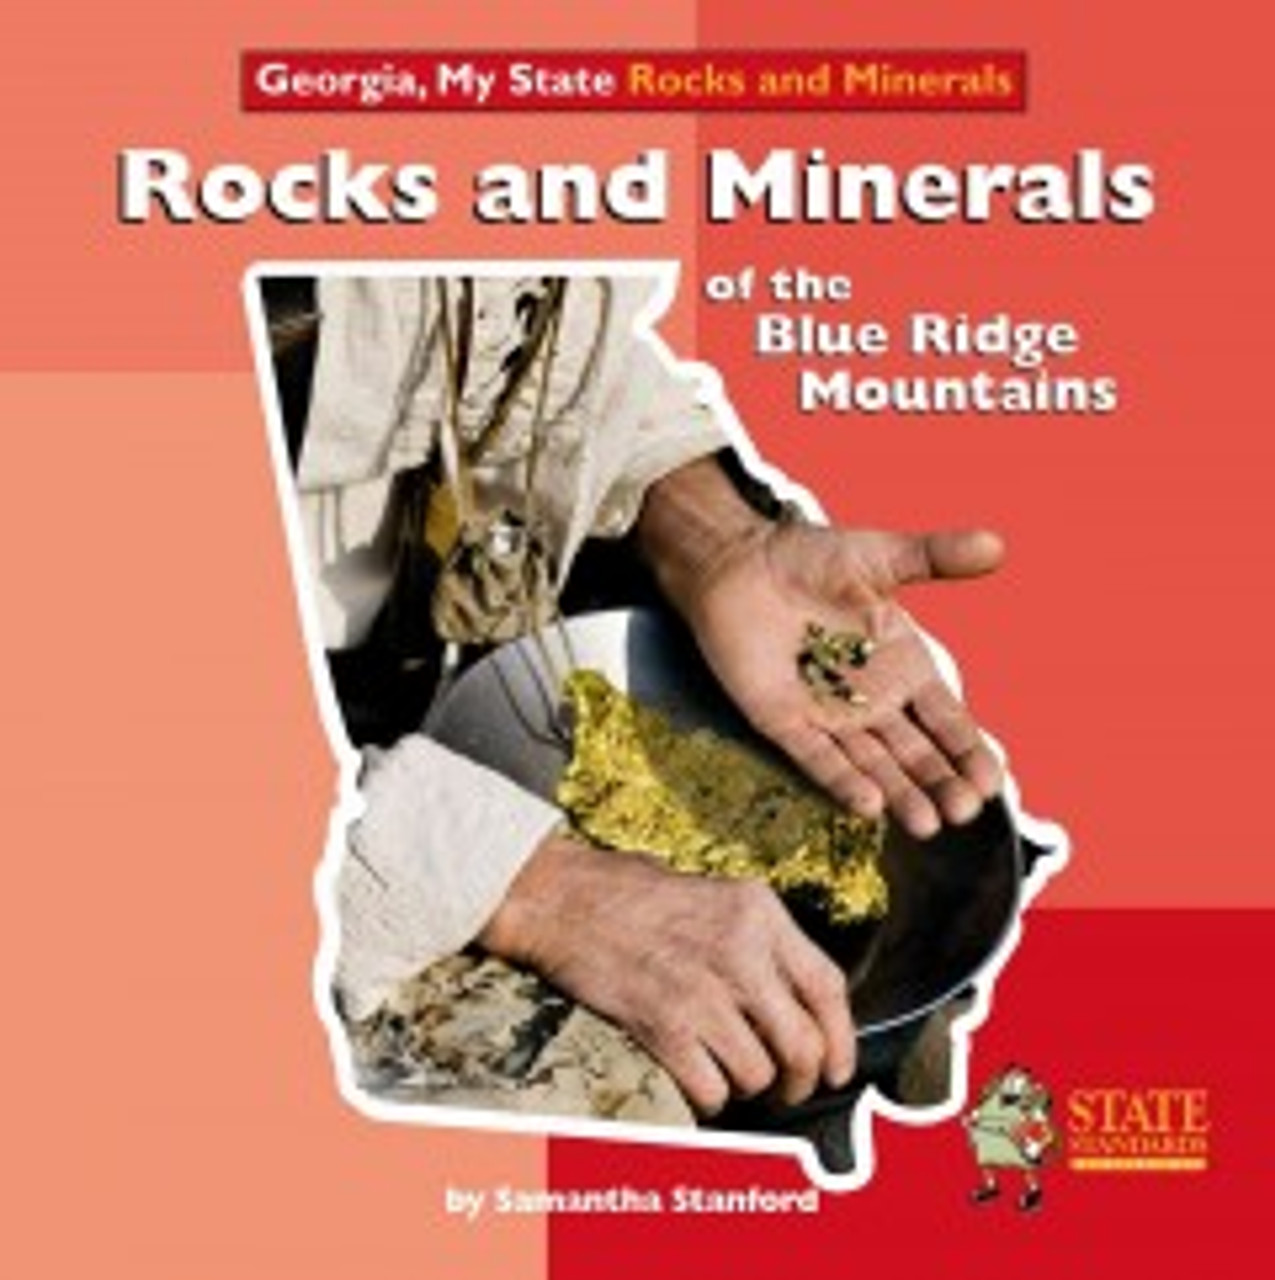 <p>Information about rocks and minerals that can be found in the Blude Ridge Mountain region of Georgia</p>